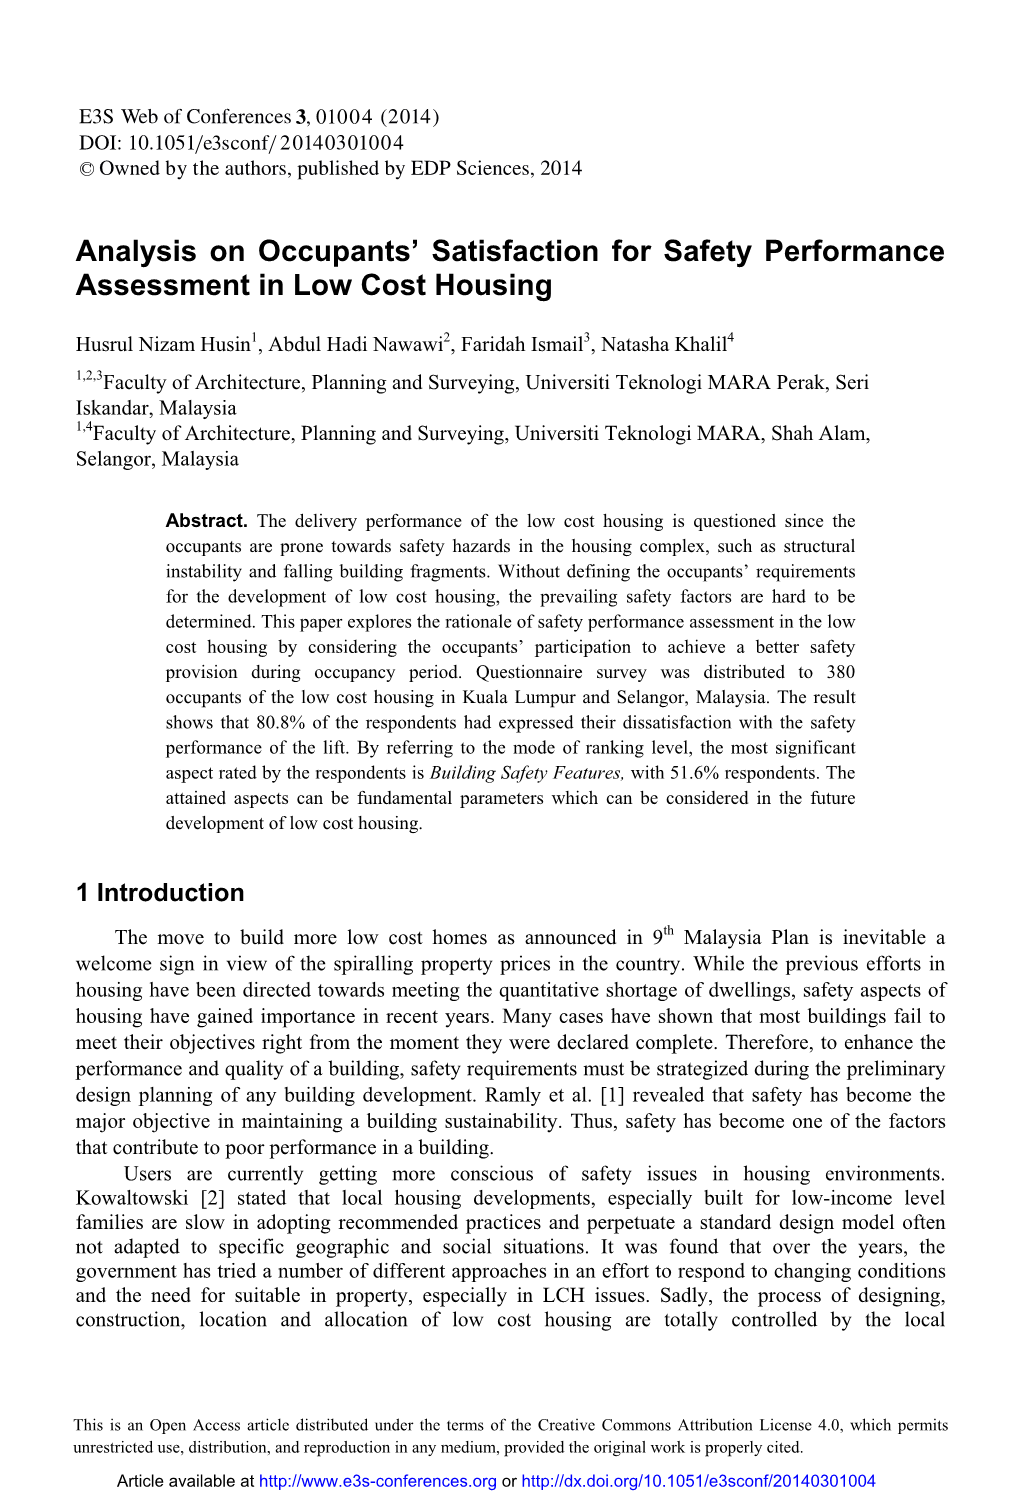 Analysis on Occupants' Satisfaction for Safety Performance Assessment In